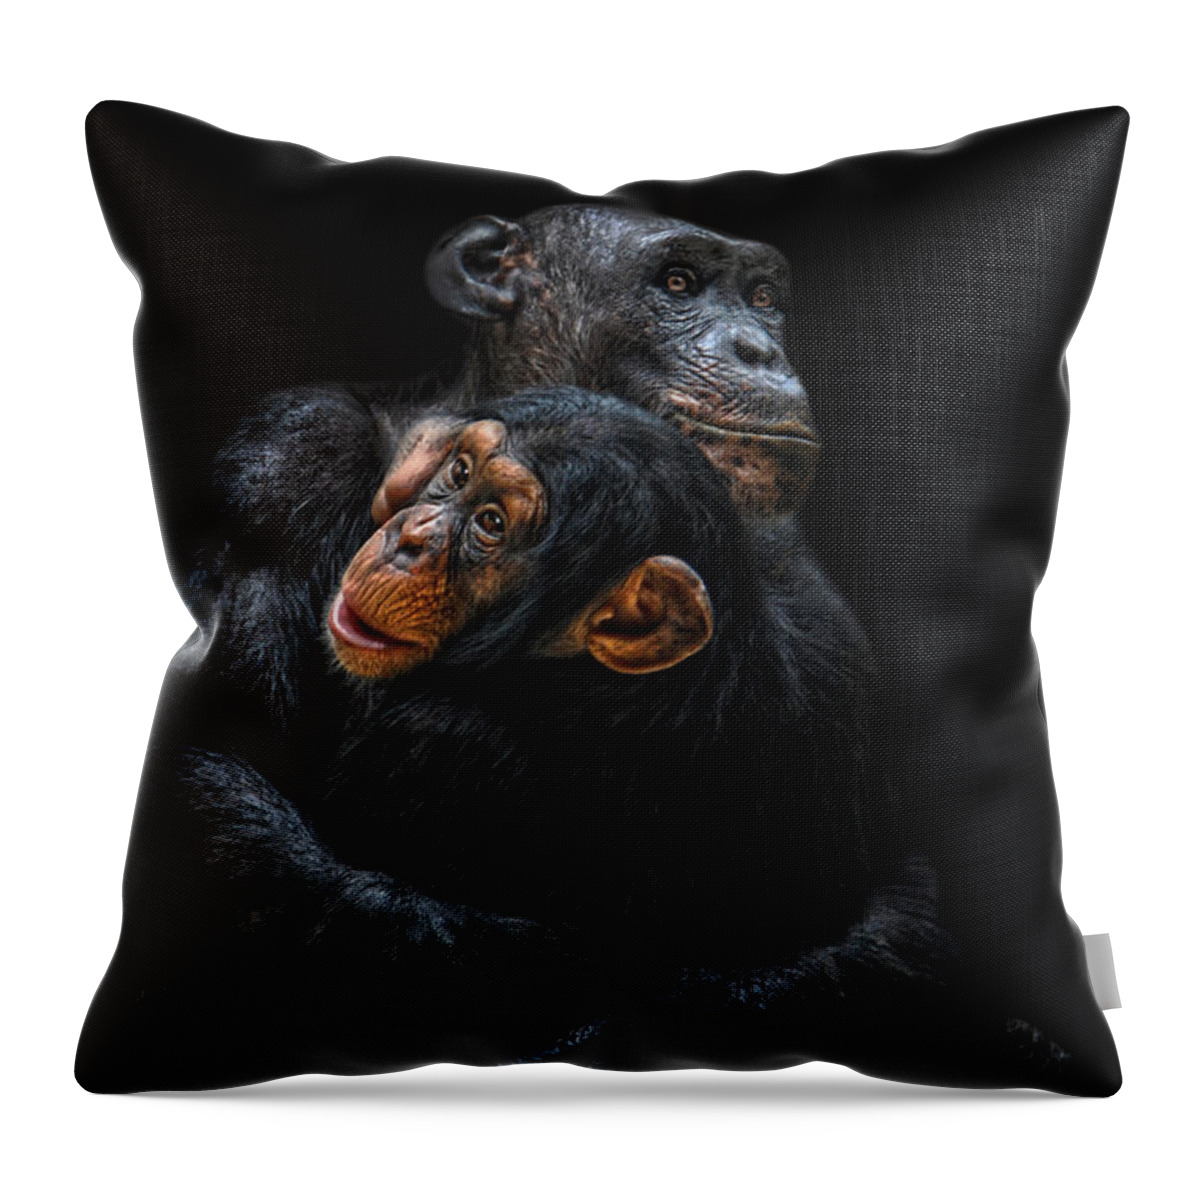 Mother Throw Pillow featuring the photograph Mother And Child by Joachim G Pinkawa